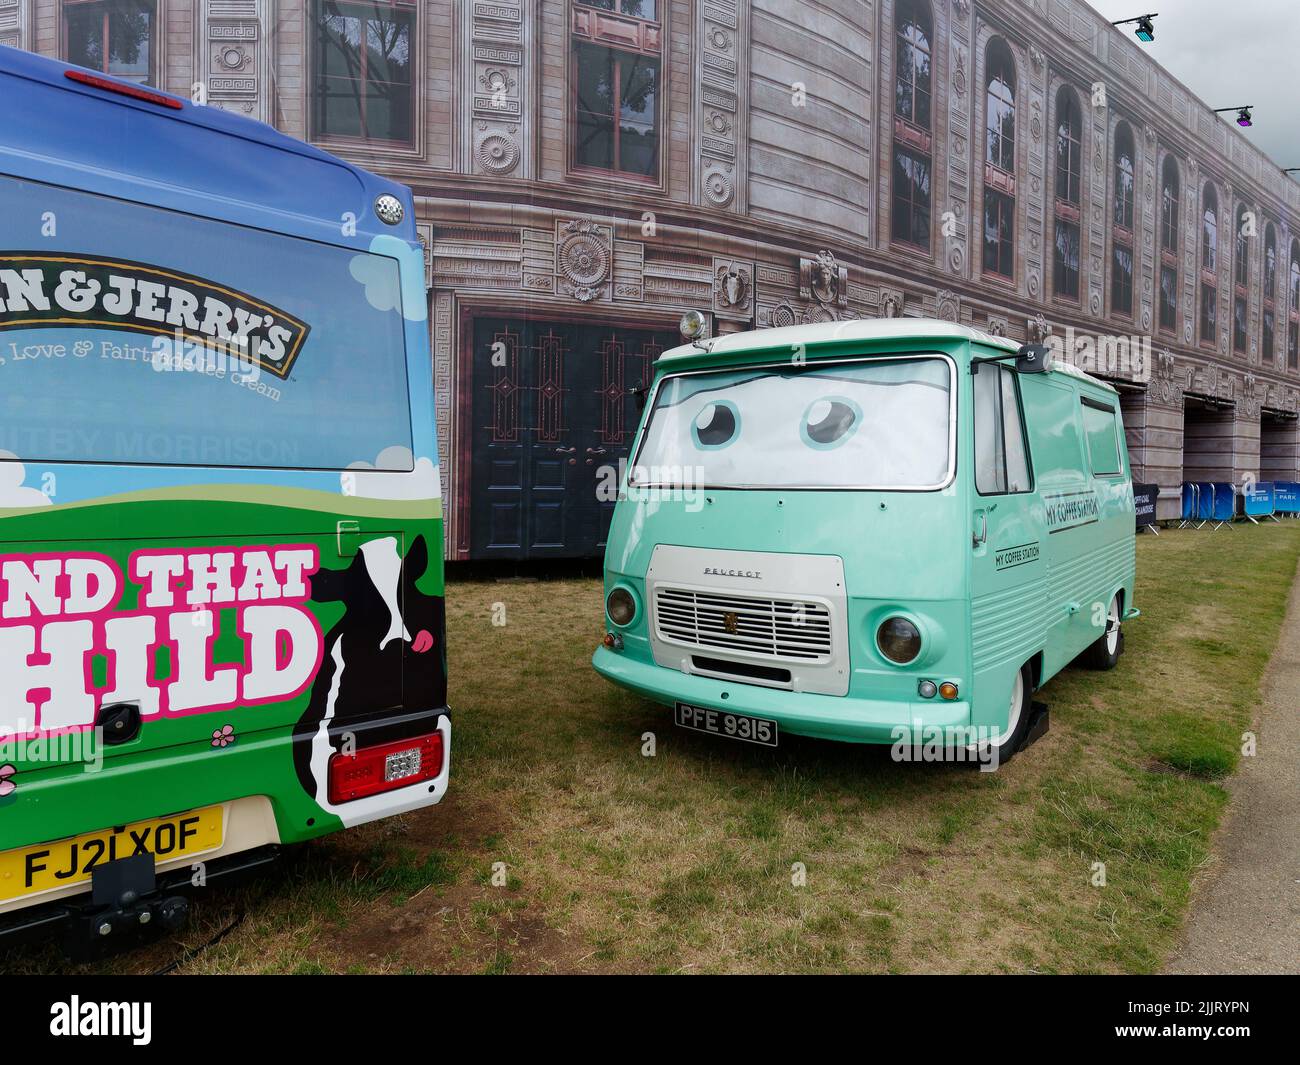 London, Greater London, England, June 30 2022: Novelty coffee van with eyes on the windscreen and the back of an ice cream van at BST Hyde Park concer Stock Photo